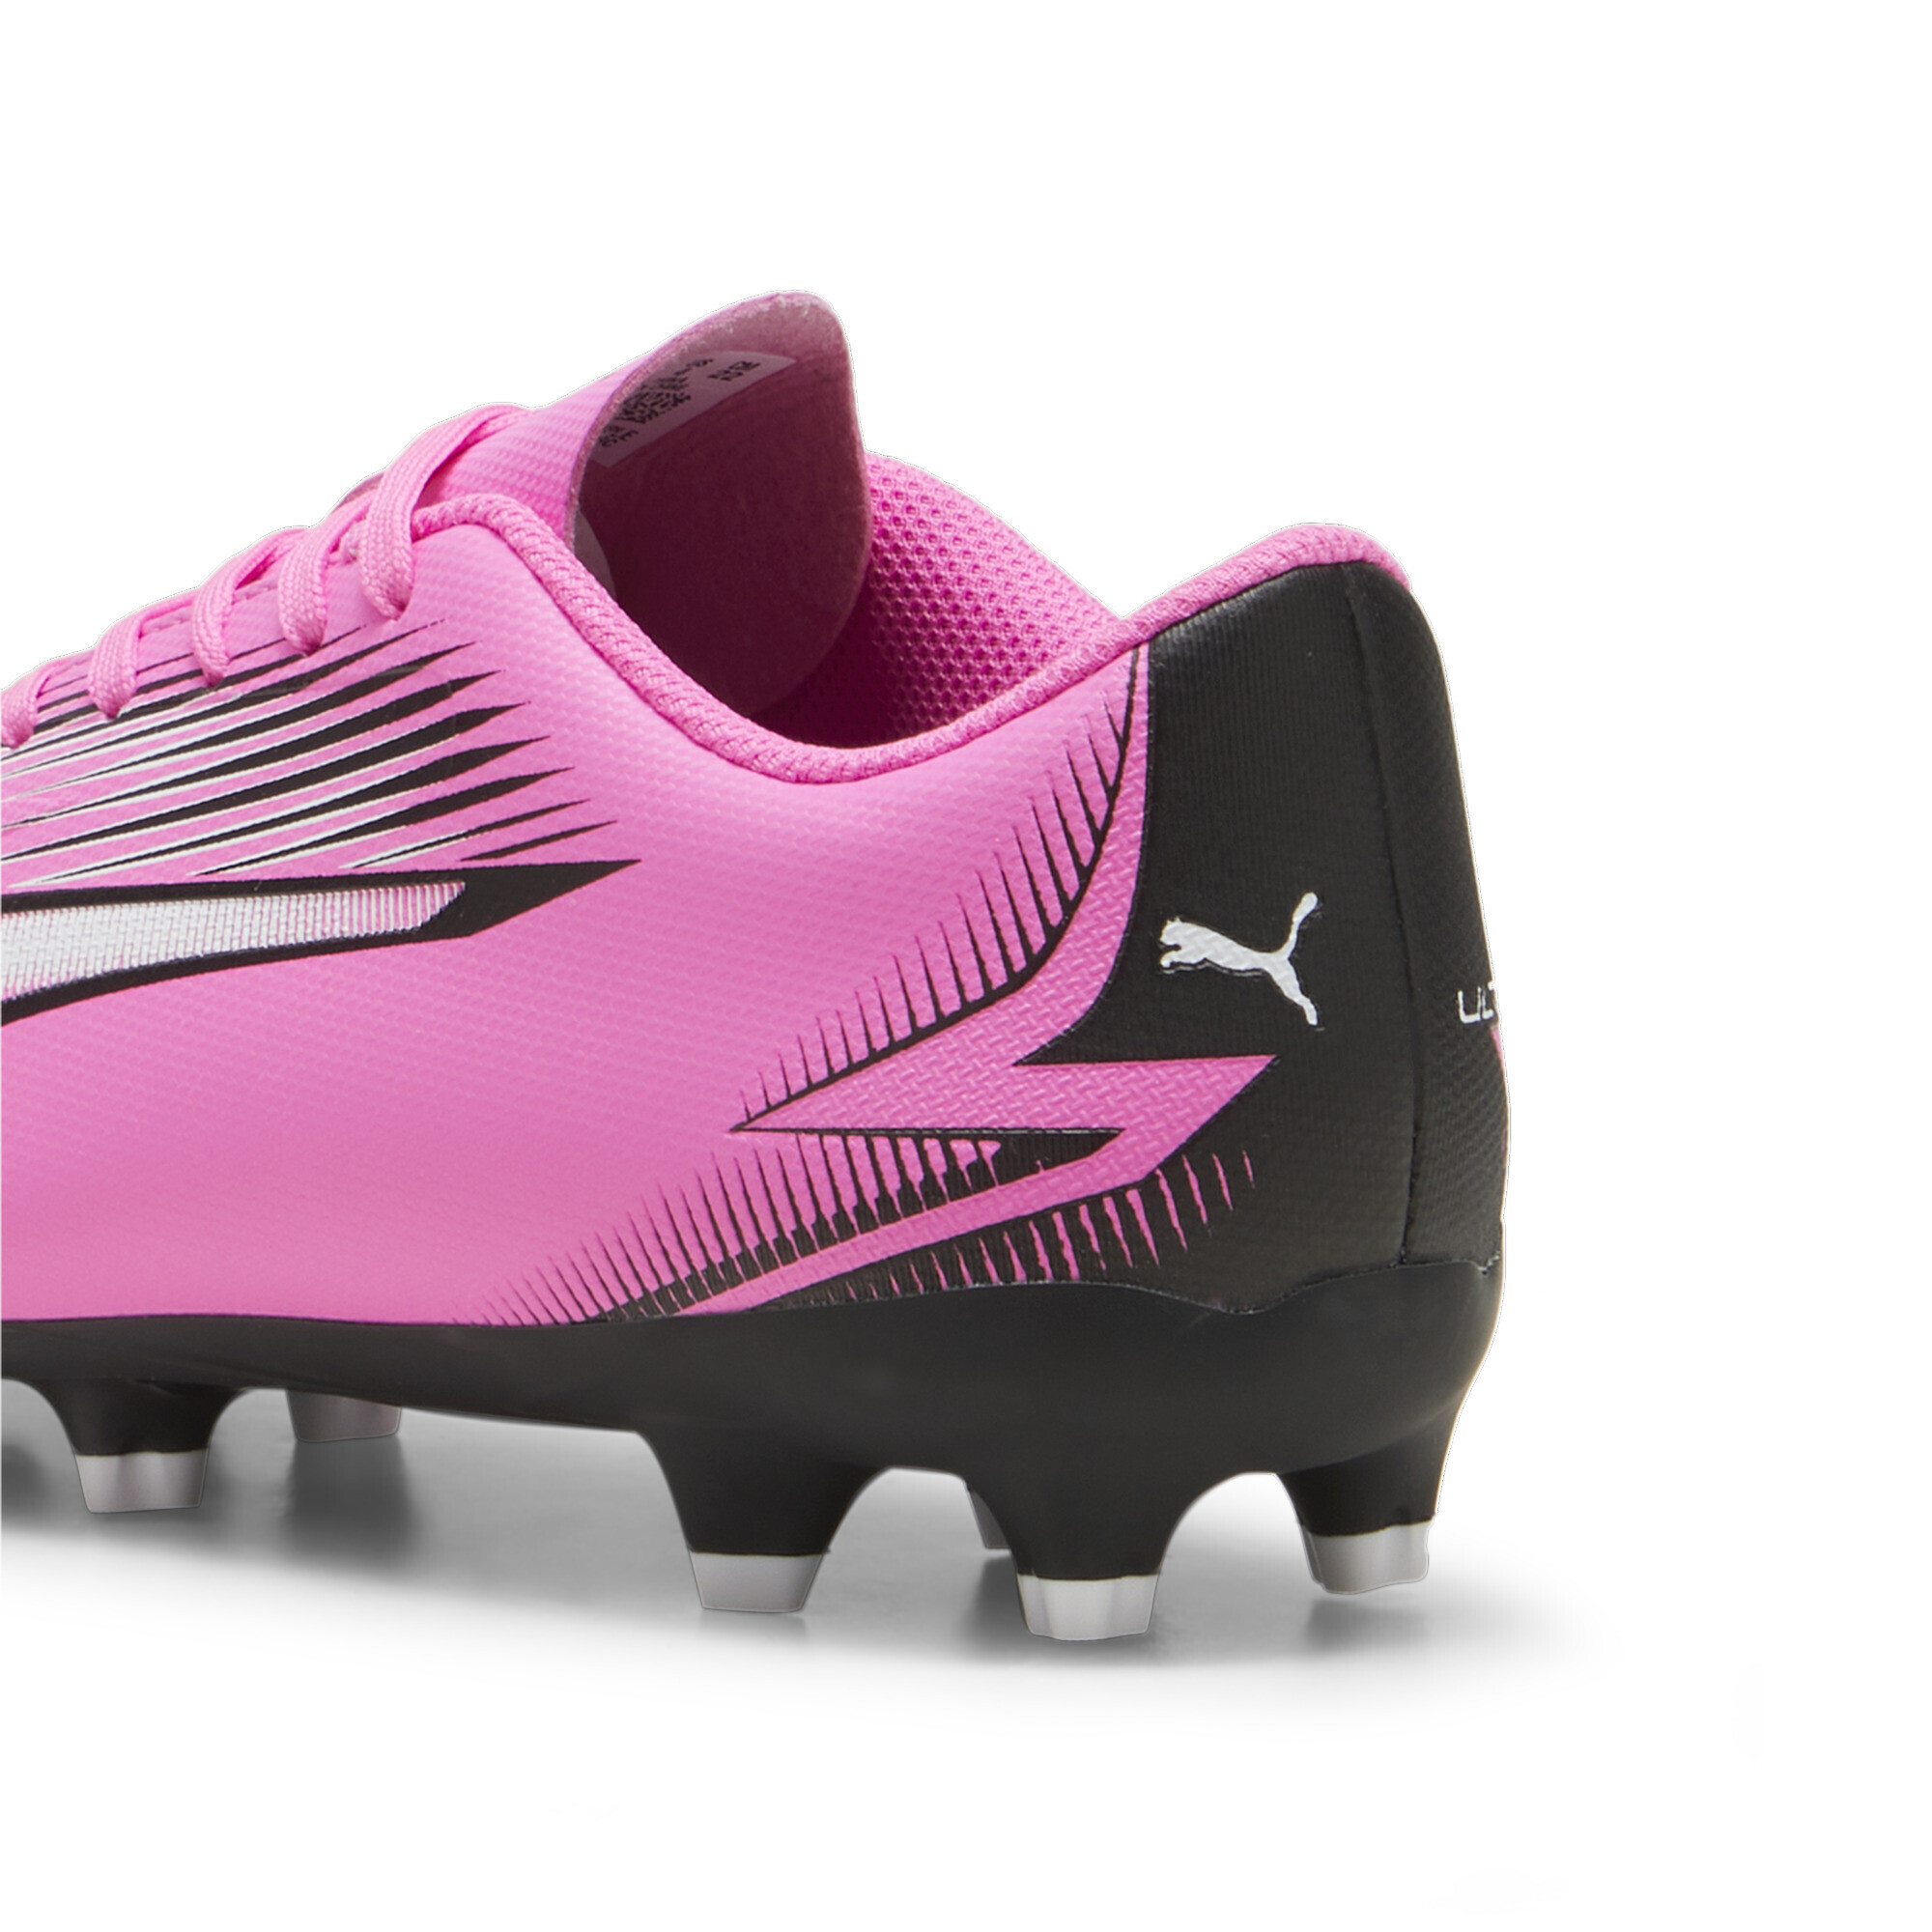 PUMA ULTRA PLAY FG/AG Youth Football Boots In Pink, Size EU 30